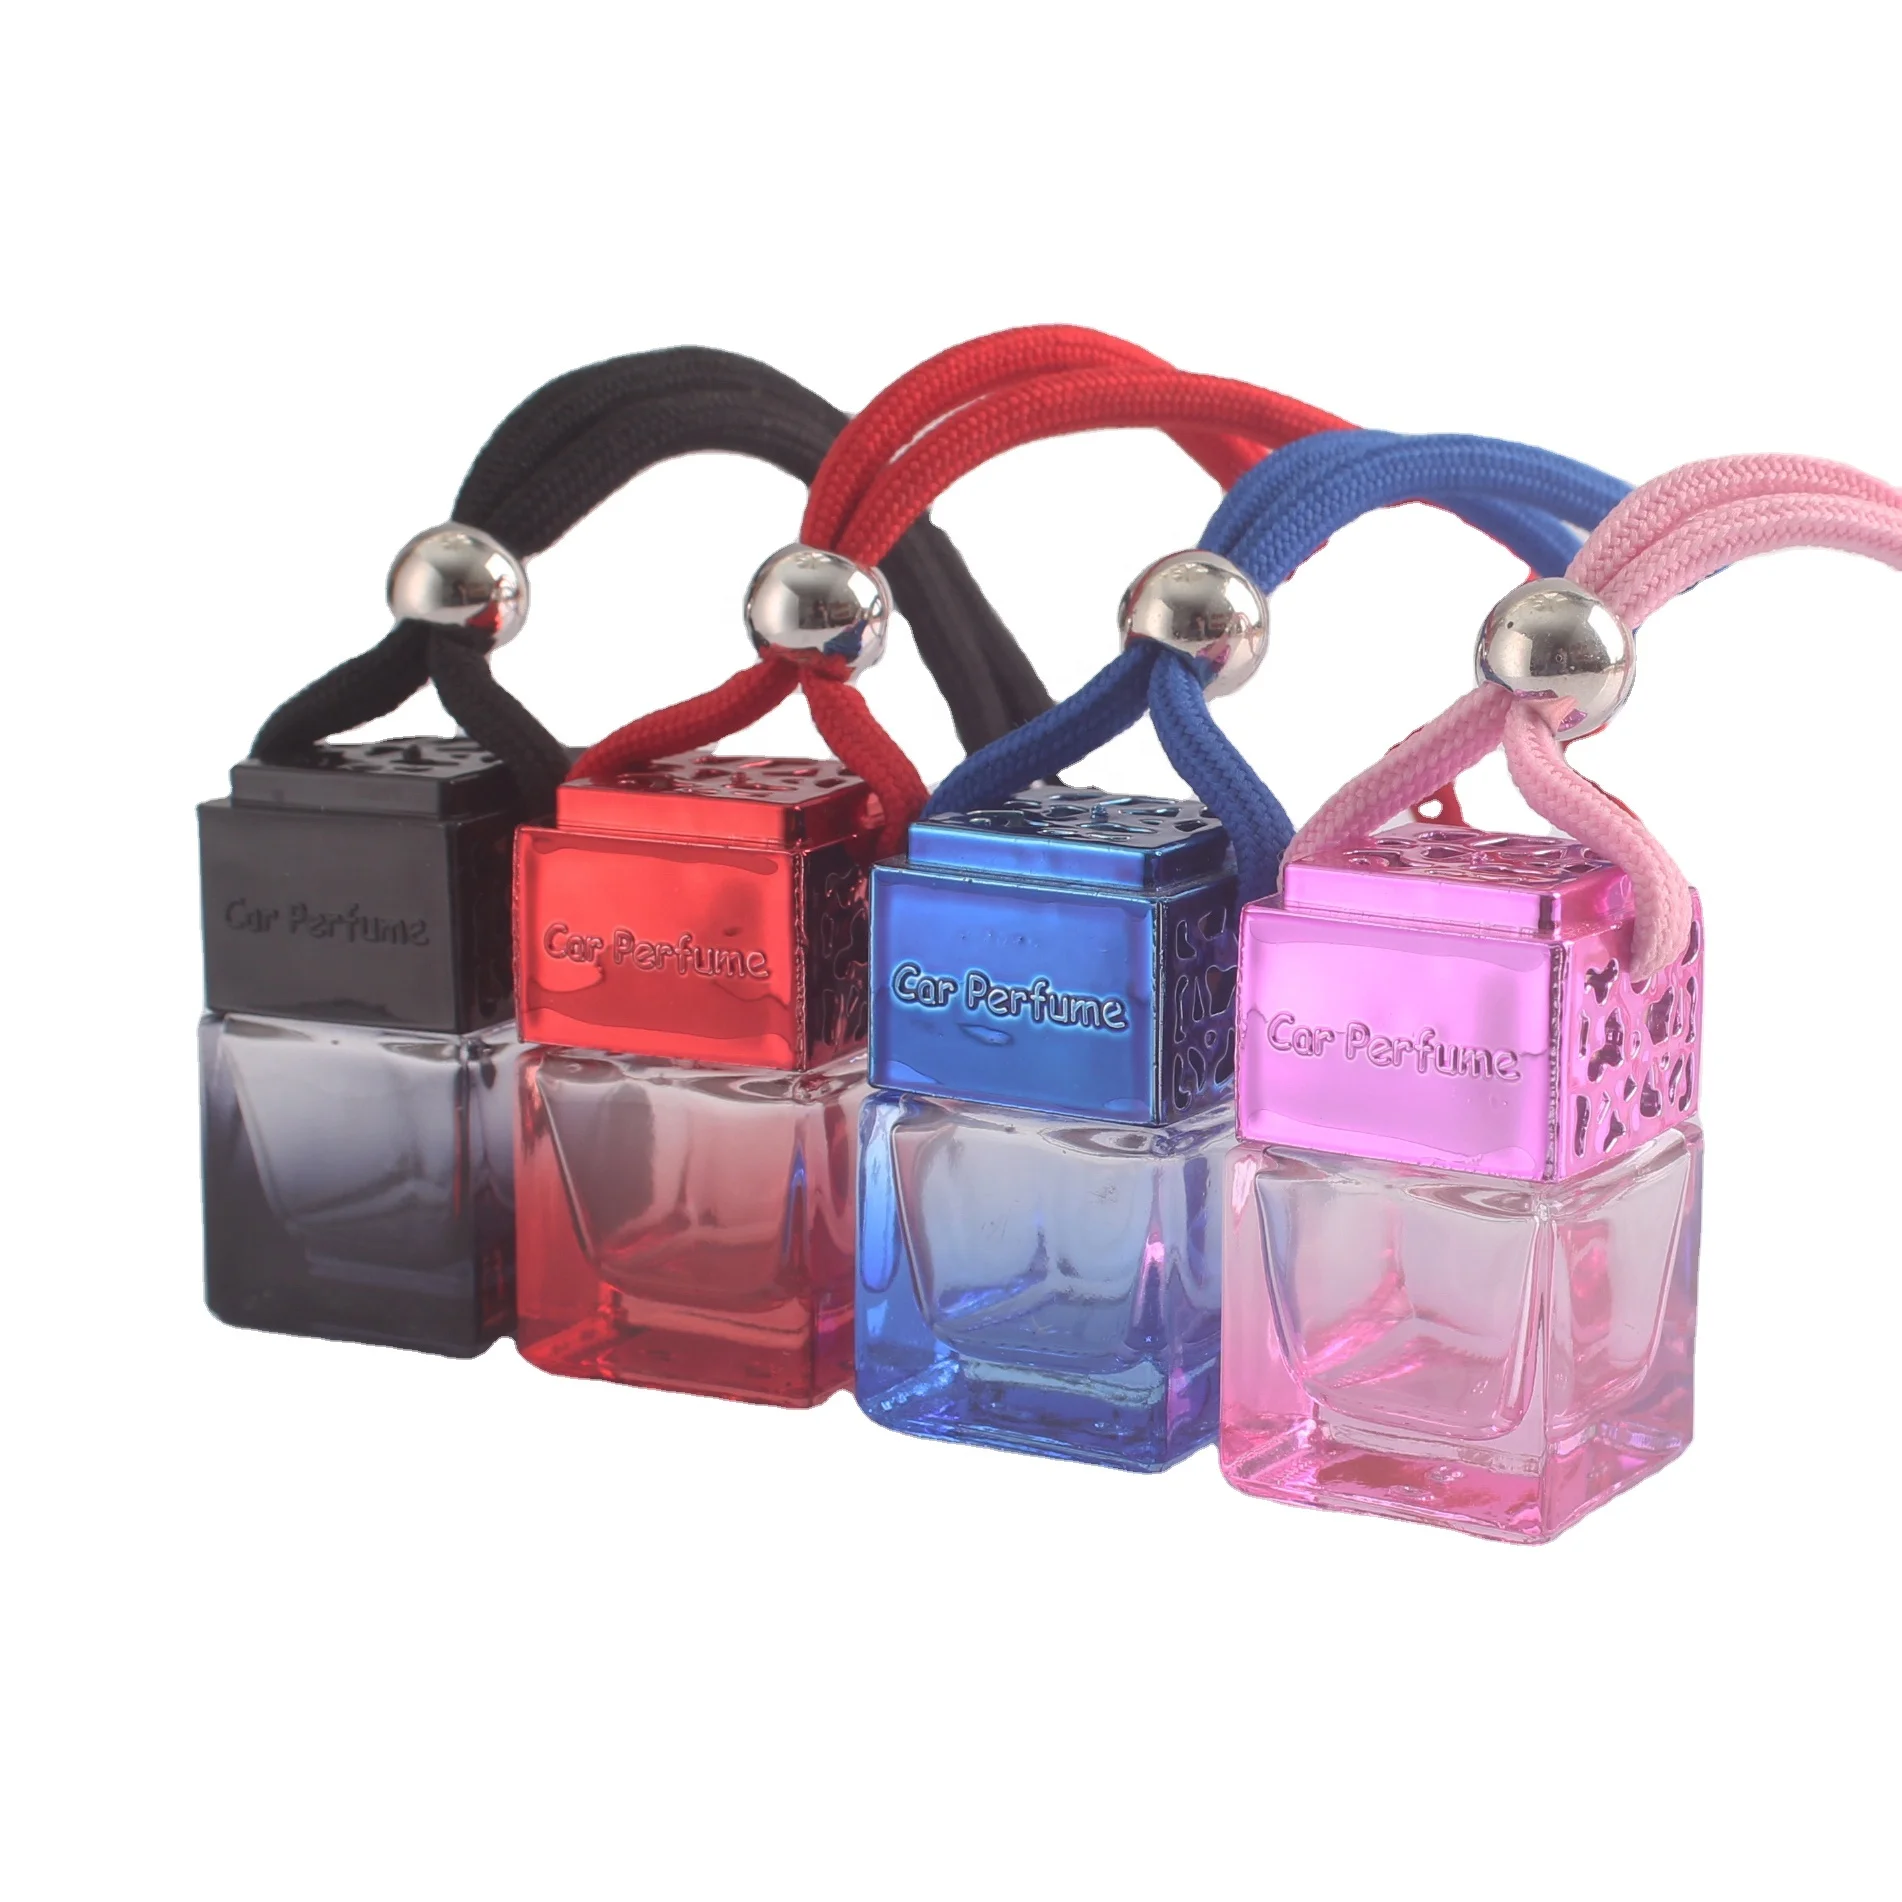 

6ml Car fragrance reed diffuser black bottles colorful square glass bottle perfume aroma auto hanging diffuser air freshener